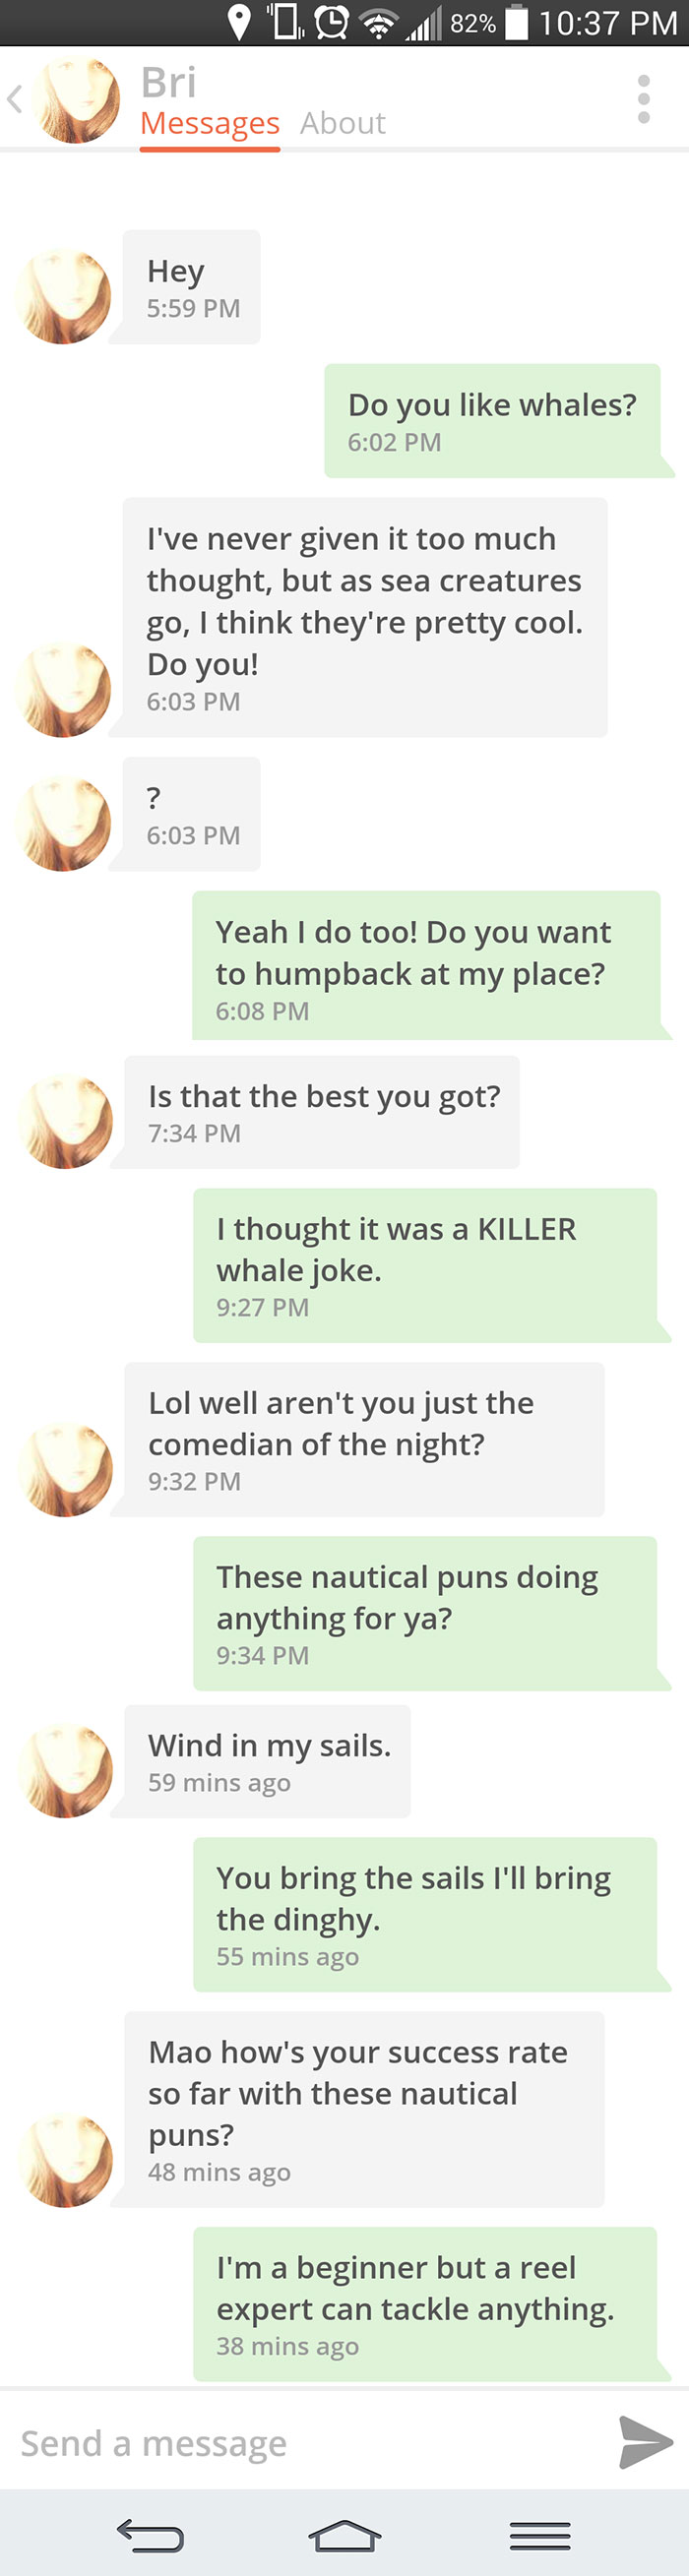 dating puns site